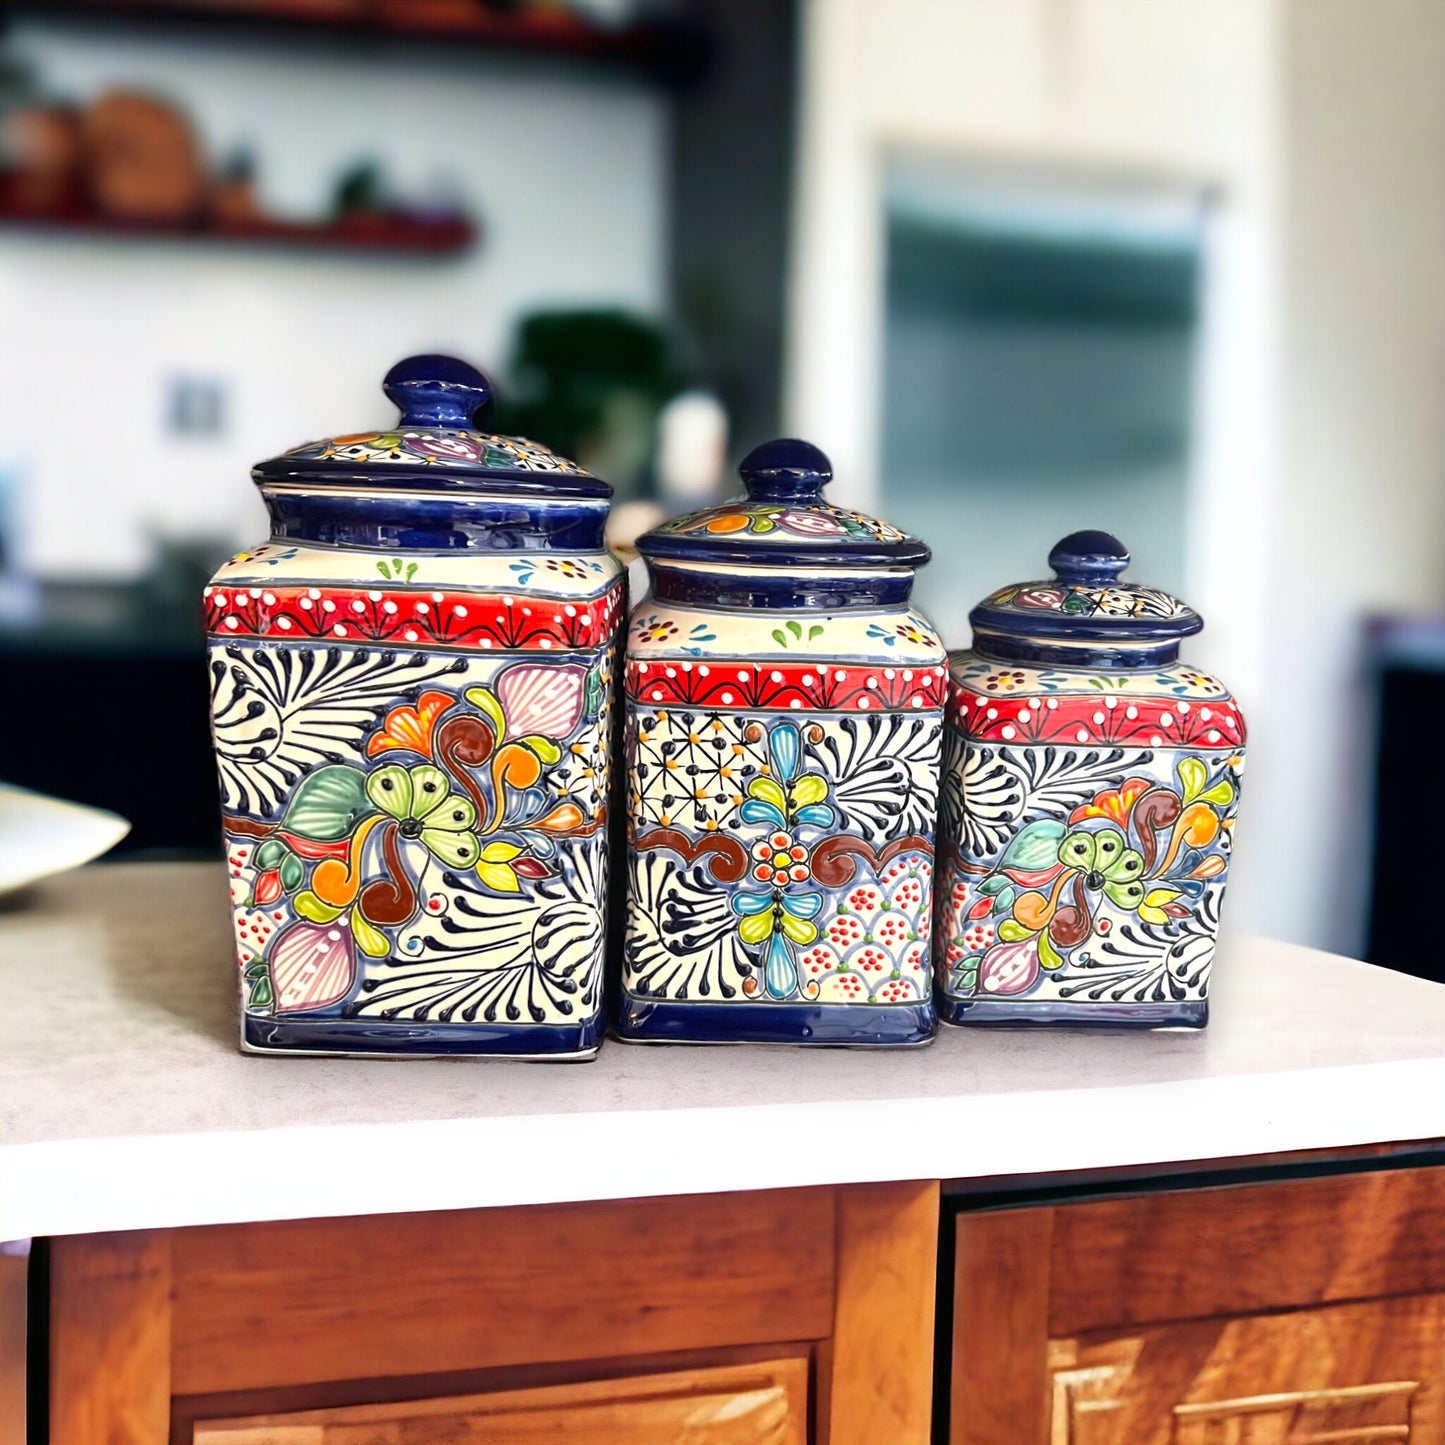 Set of 3 Dark Blue Talavera Canisters | Handcrafted Mexican Pottery from Puebla